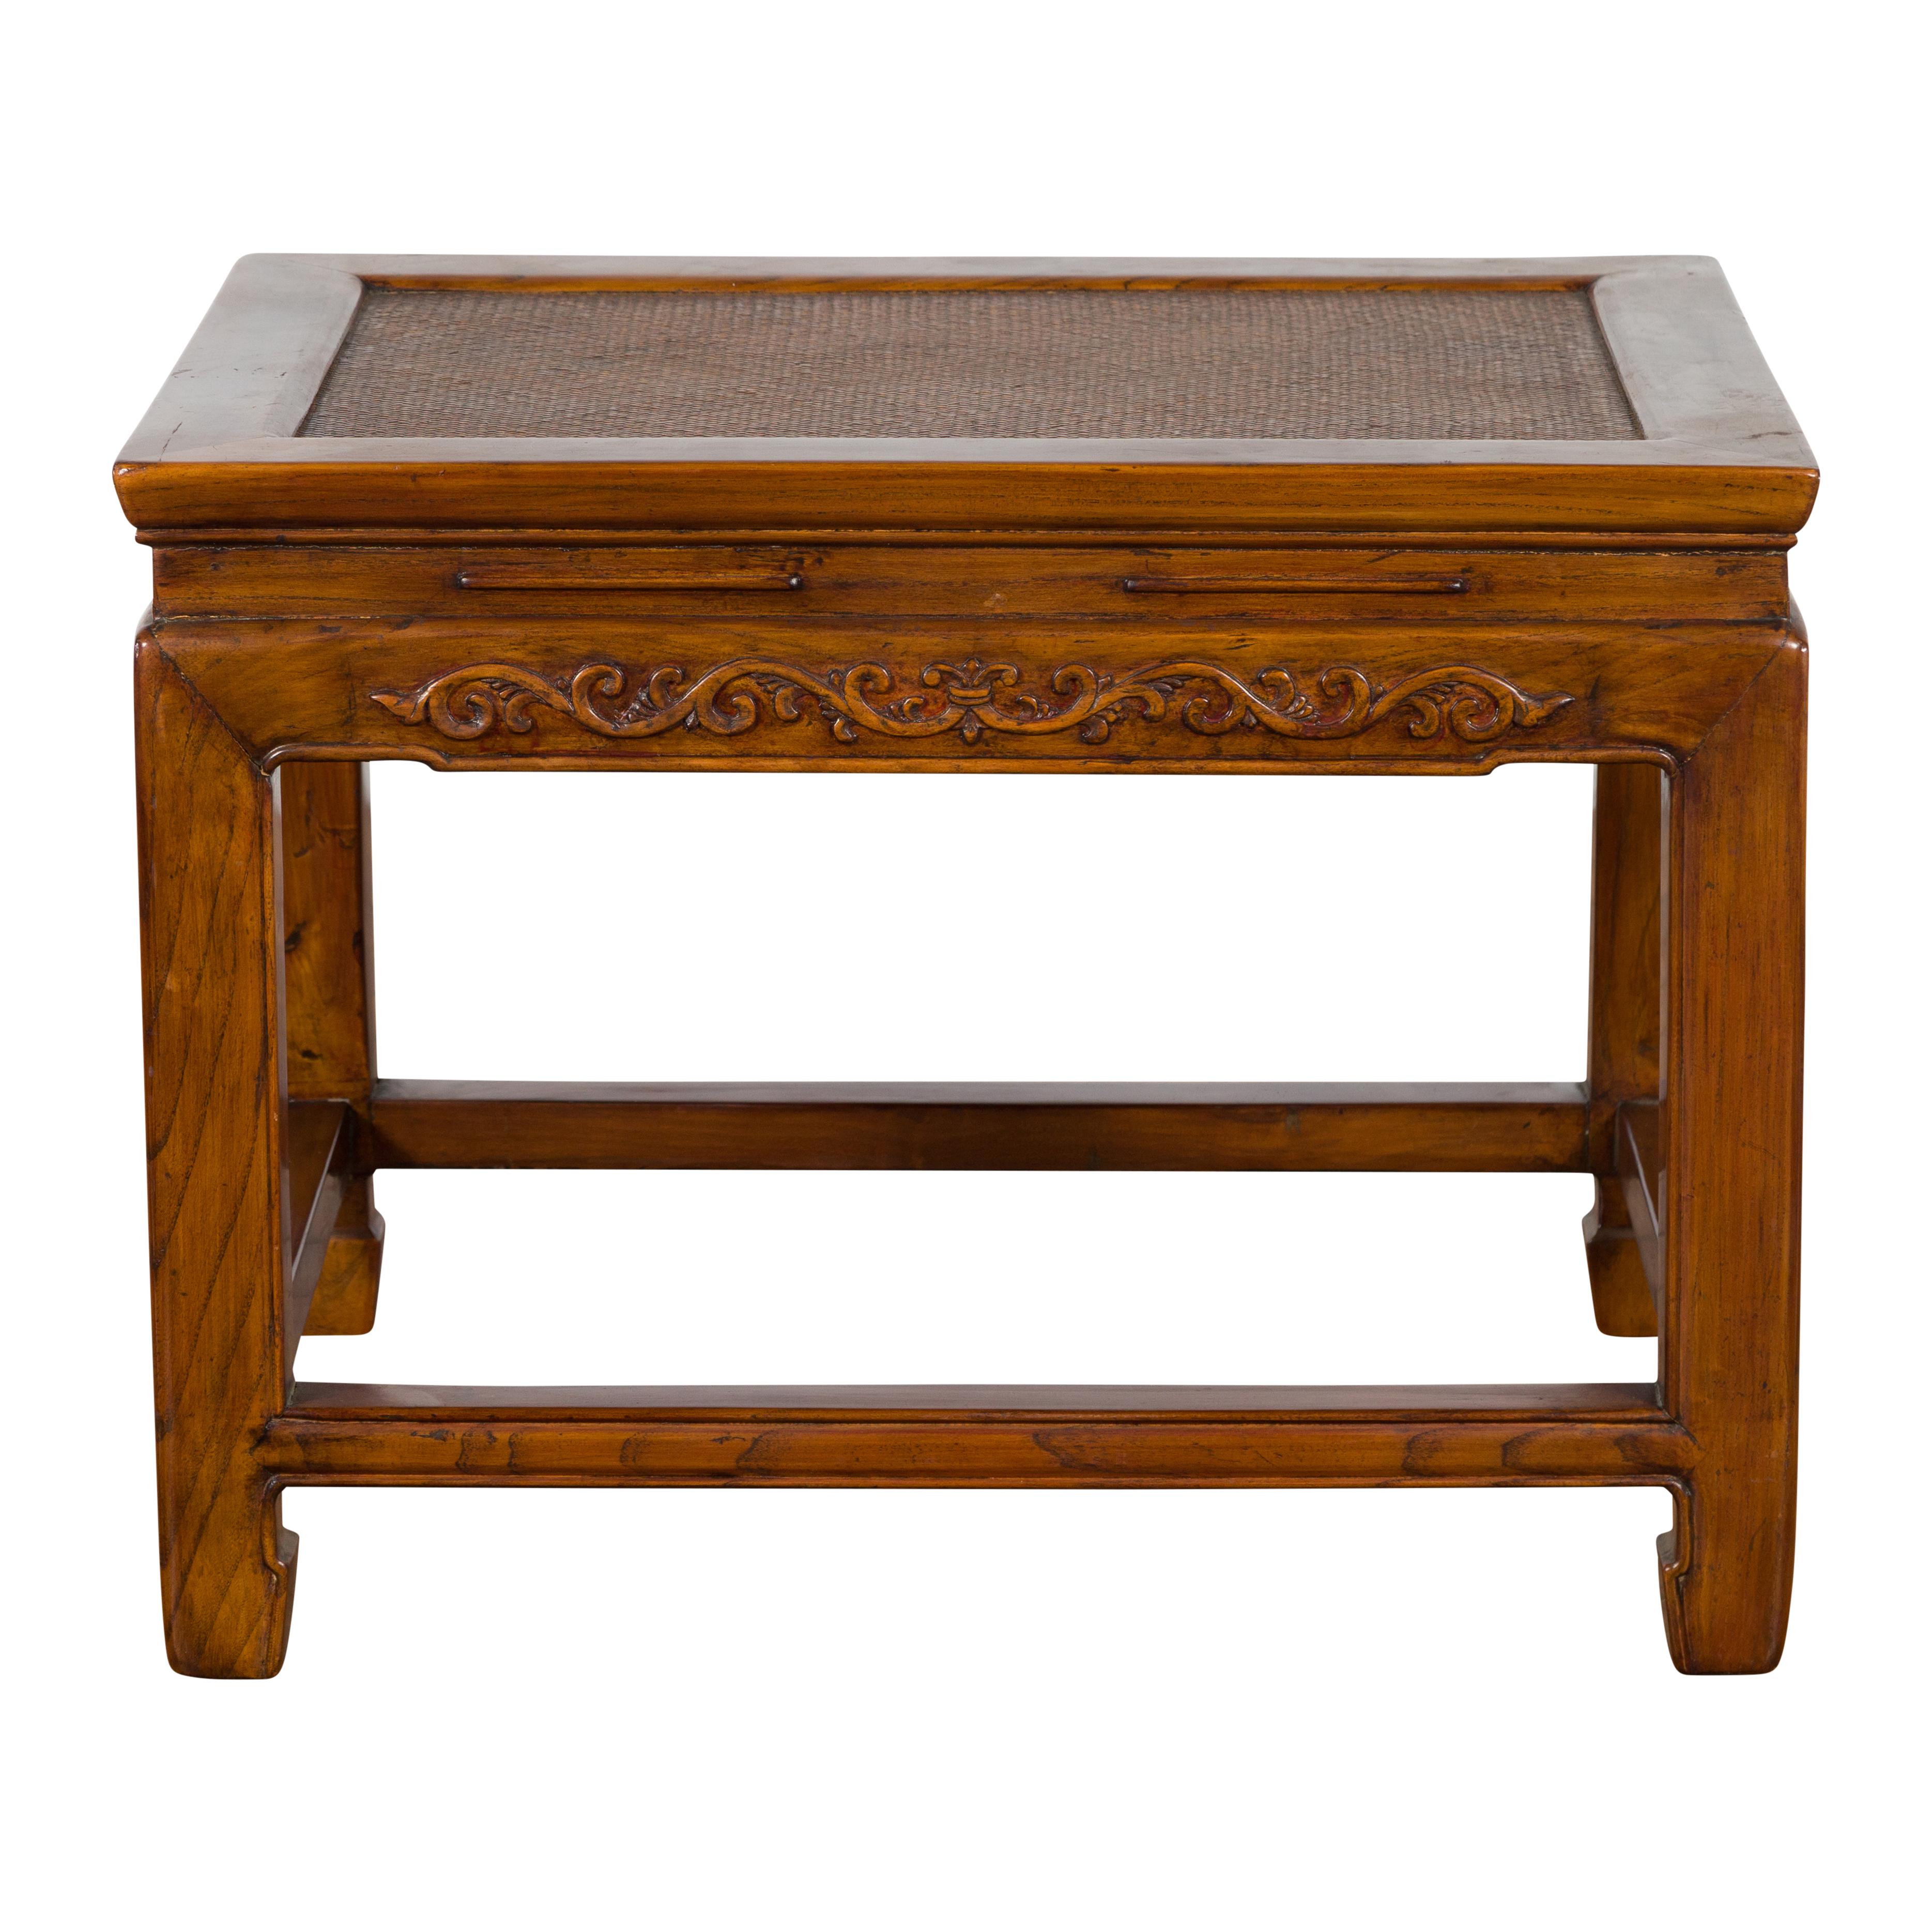 A Chinese late Qing Dynasty period elm wood side table from the early 20th century with woven rattan top, waisted apron and low-relief carved frieze. Created in China during the later years of the Qing Dynasty period in the early 20th century, this